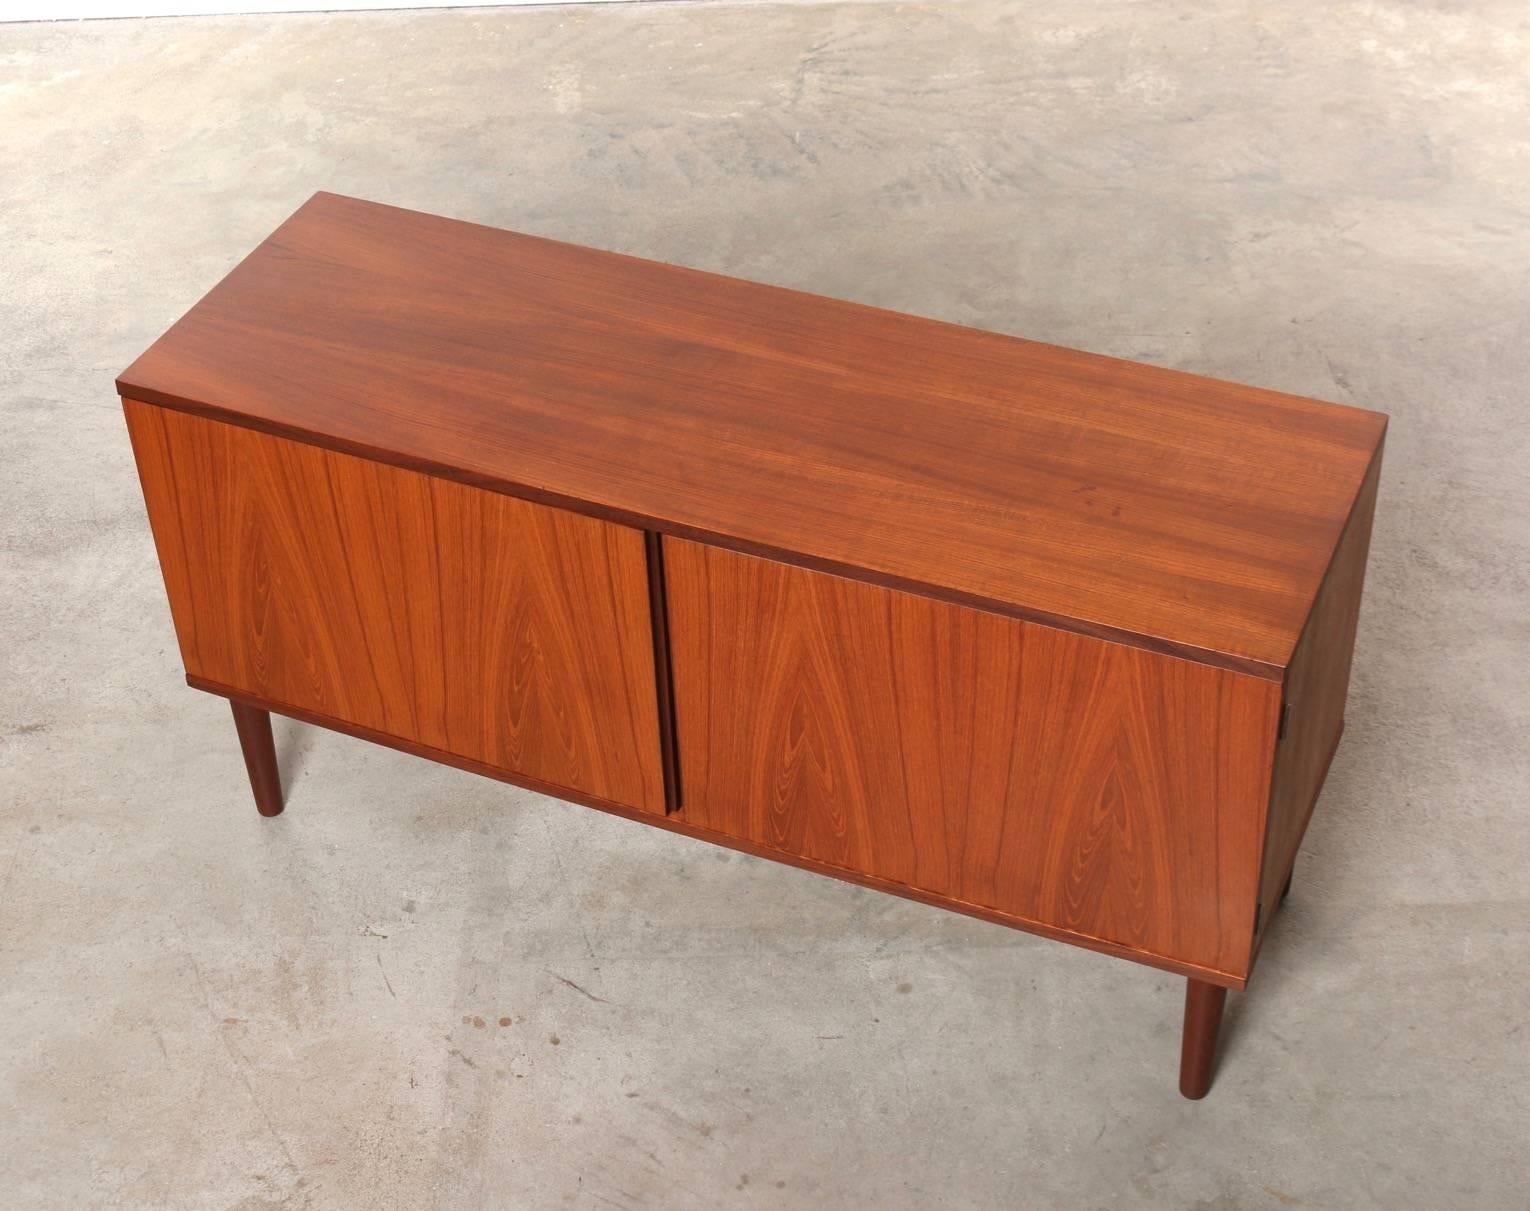 Hans Olson teak credenza cabinet. Made of stunning teakwood. Low profile, with doors that swing open wide revealing removable shelves. Plenty of interior storage for records, entertainment systems, books, blankets and more. Very sturdy and in very